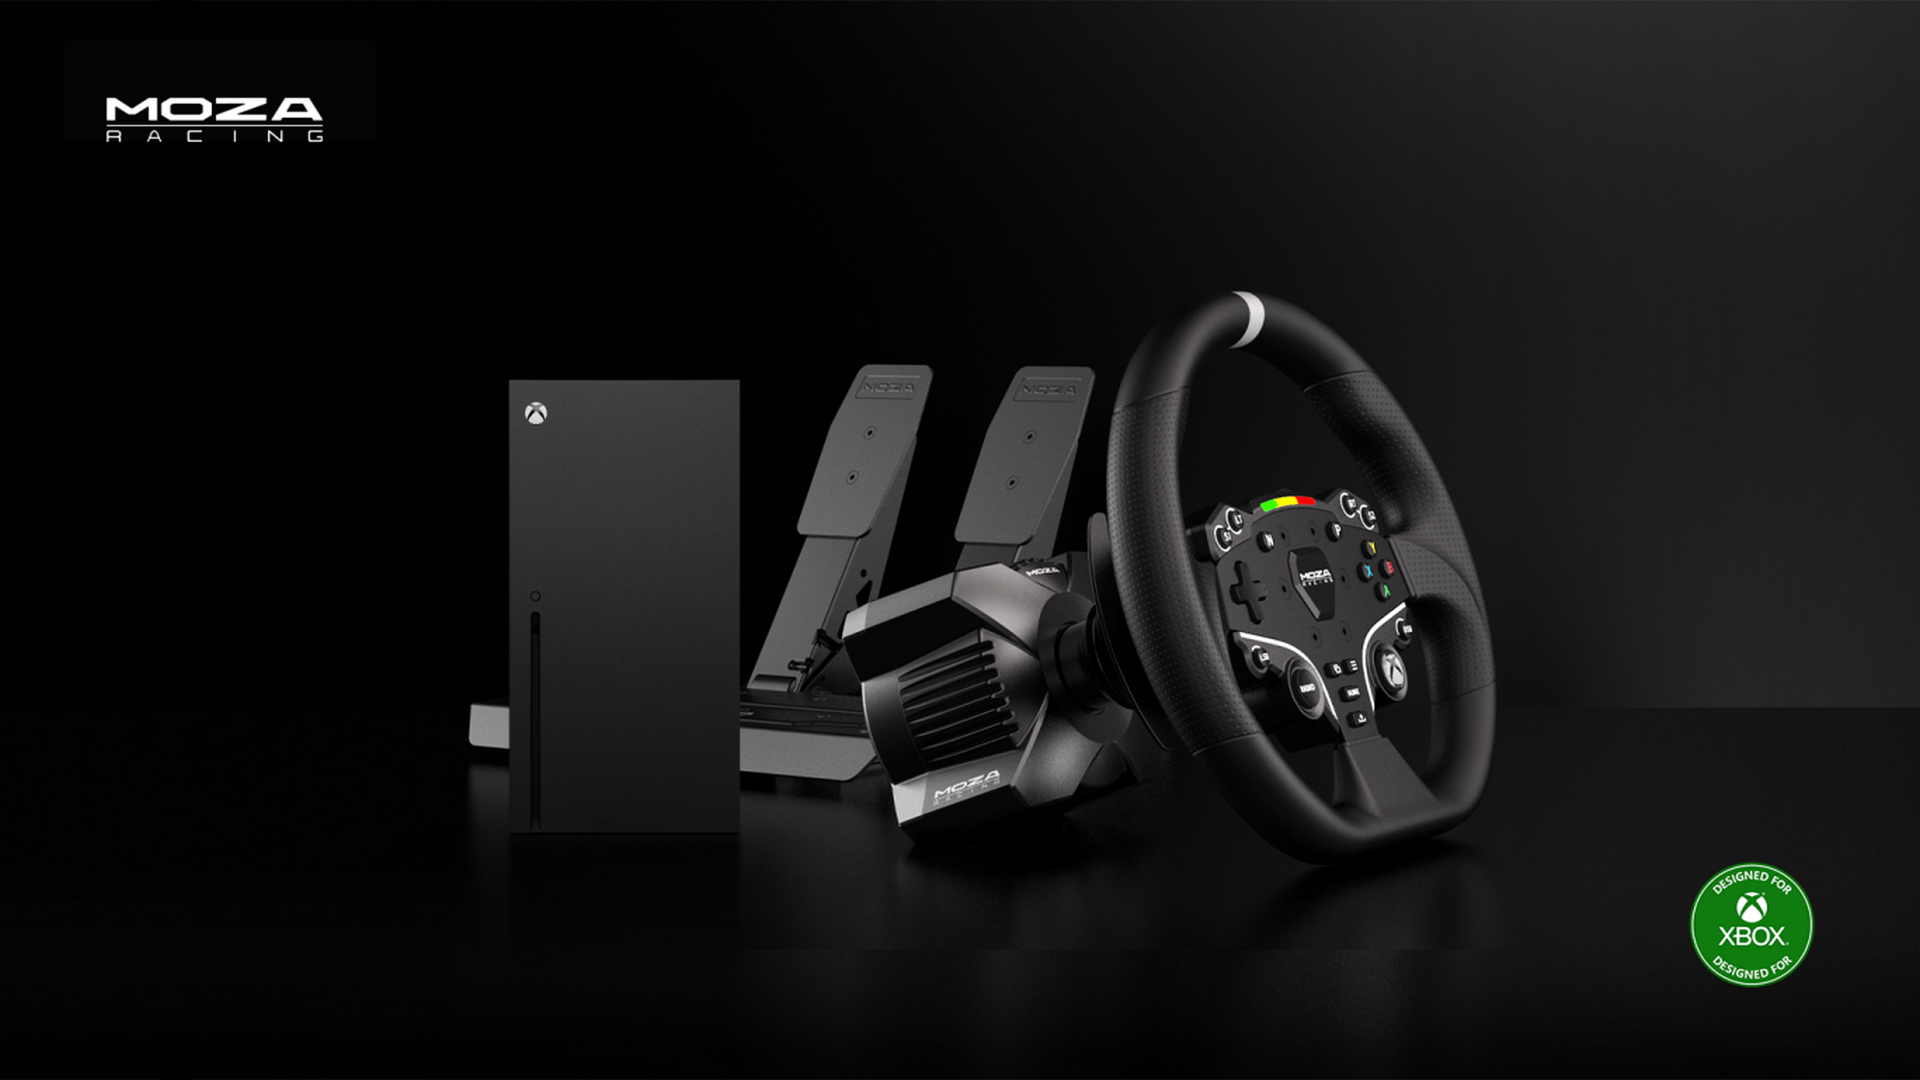 Moza Racing Launches Moza R3 Wheel & Pedals Designed For Xbox, Revolutionising Console Racing